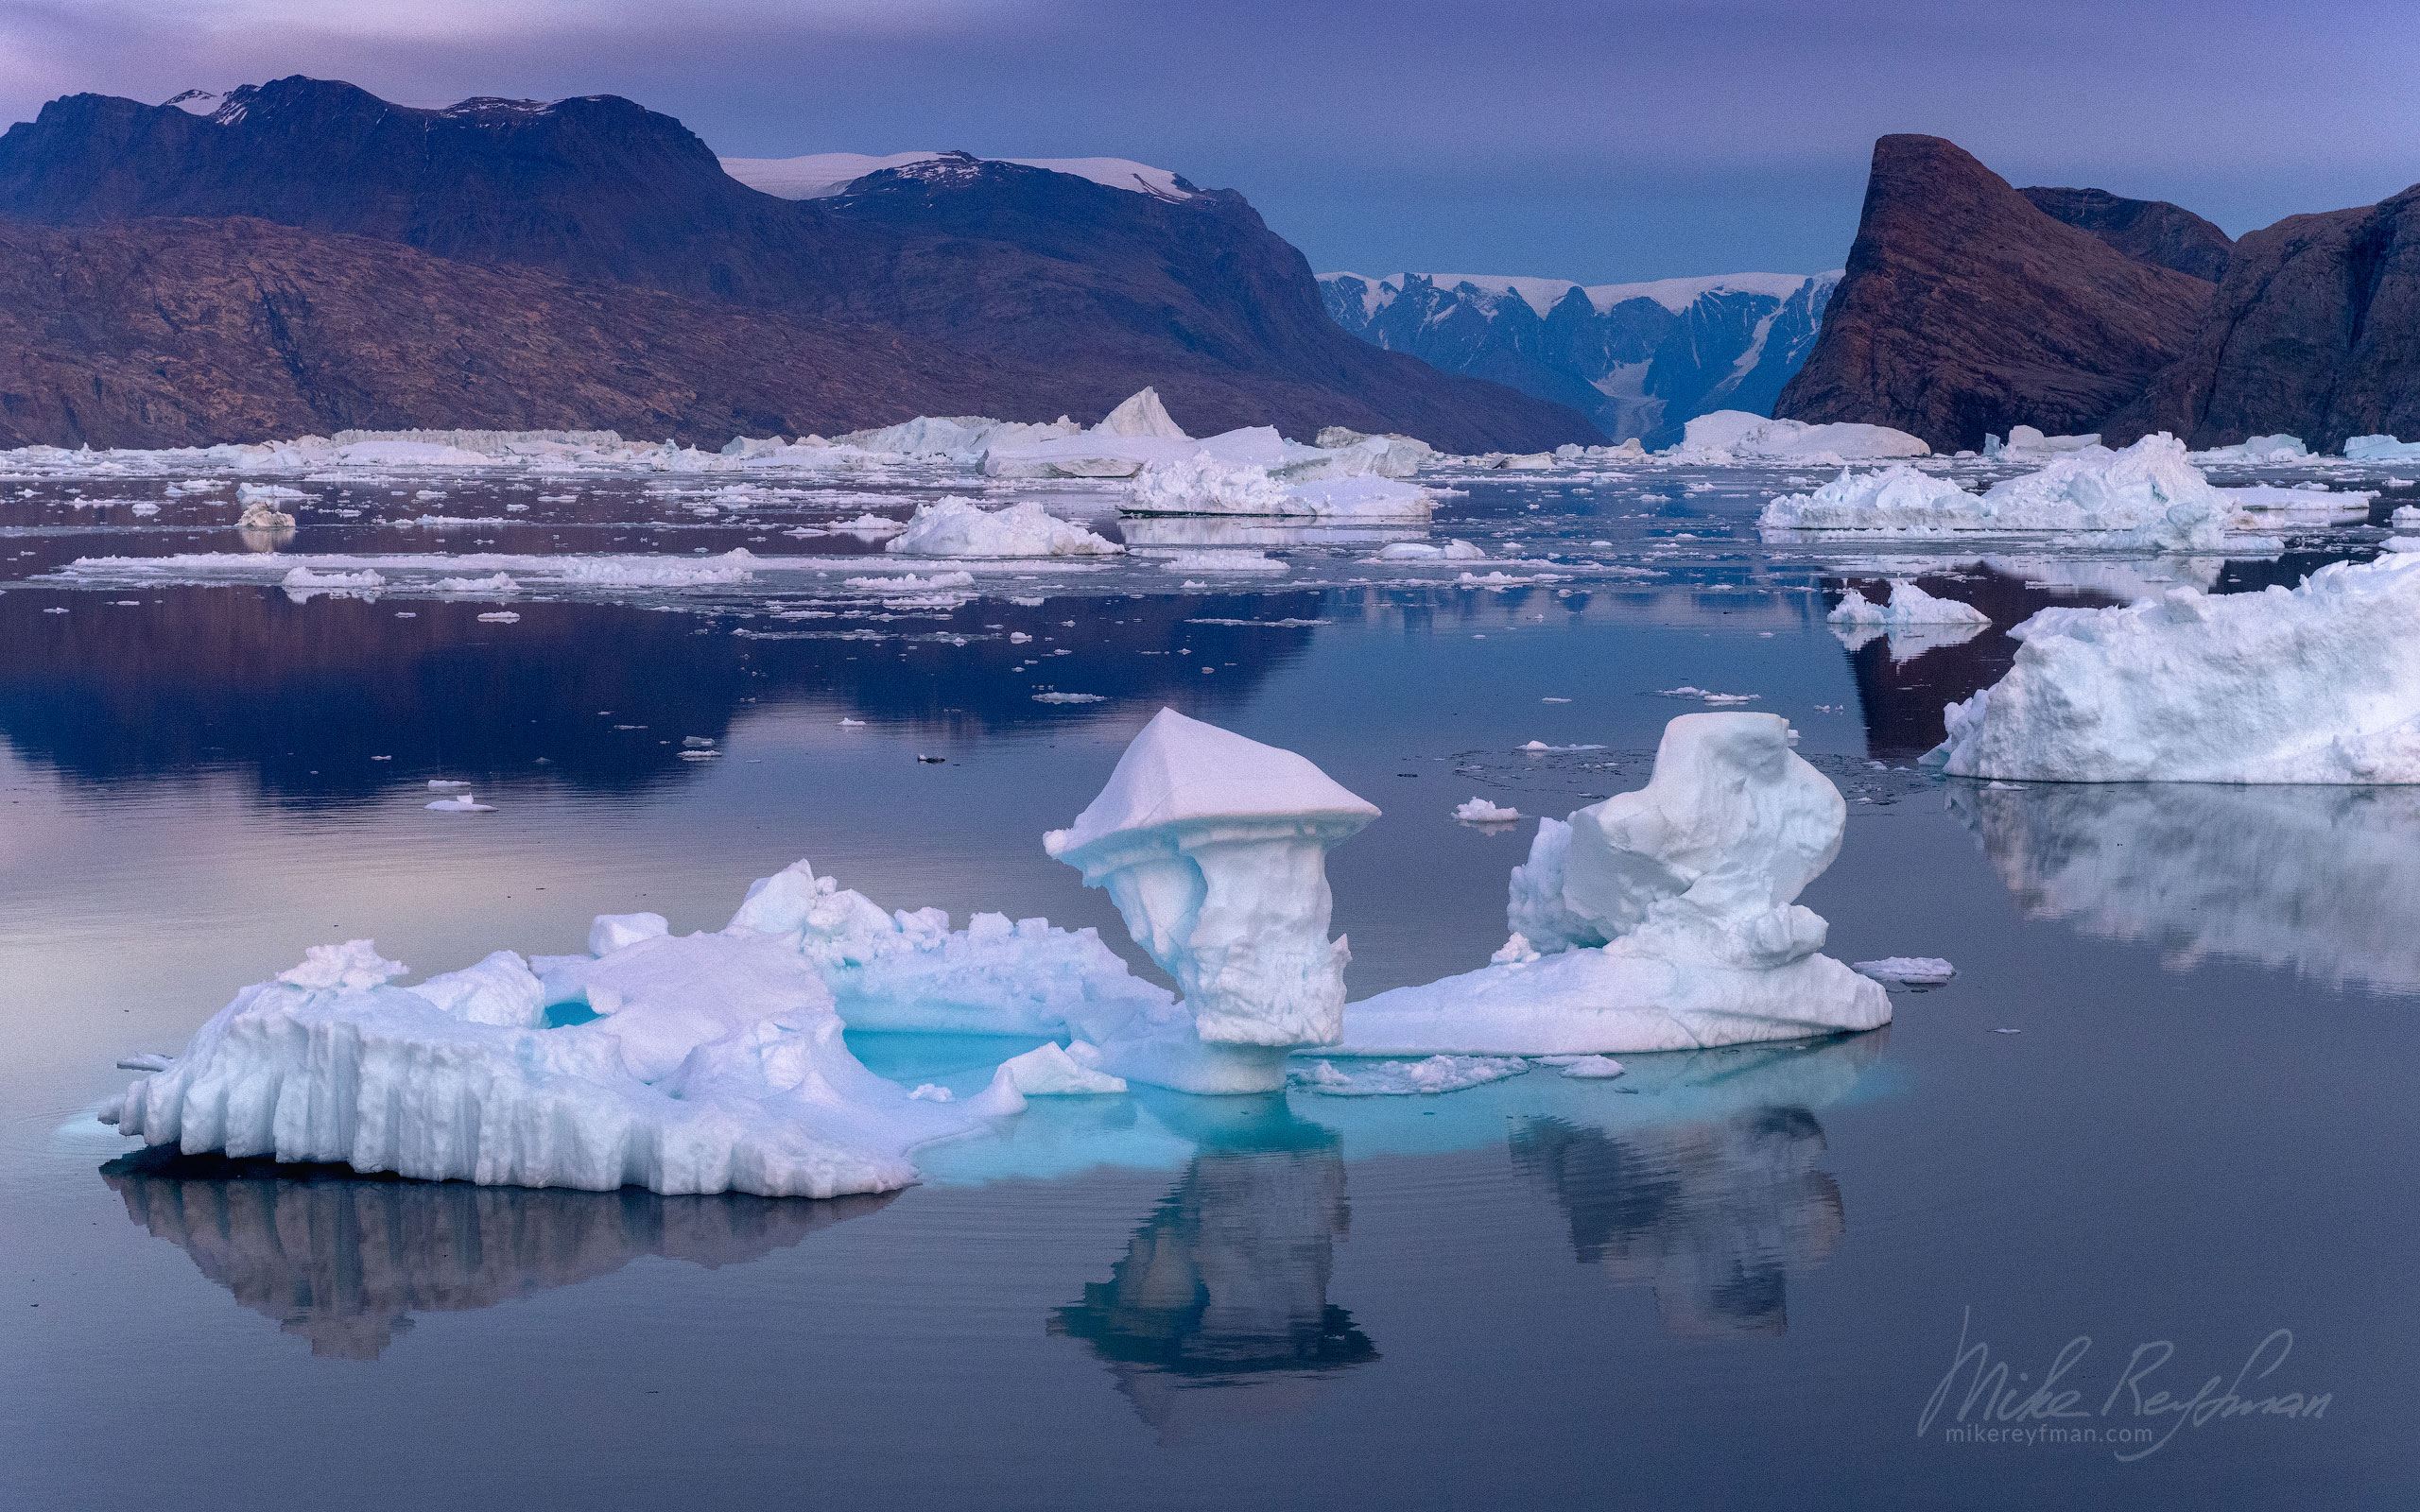 Icebergs in Scoresby Sund. Greenland. 027-GR-SC_50B6851 - The Scoresby Sund fjord system and the settlement of Ittoqqortoormiit. East Greenland. - Mike Reyfman Photography